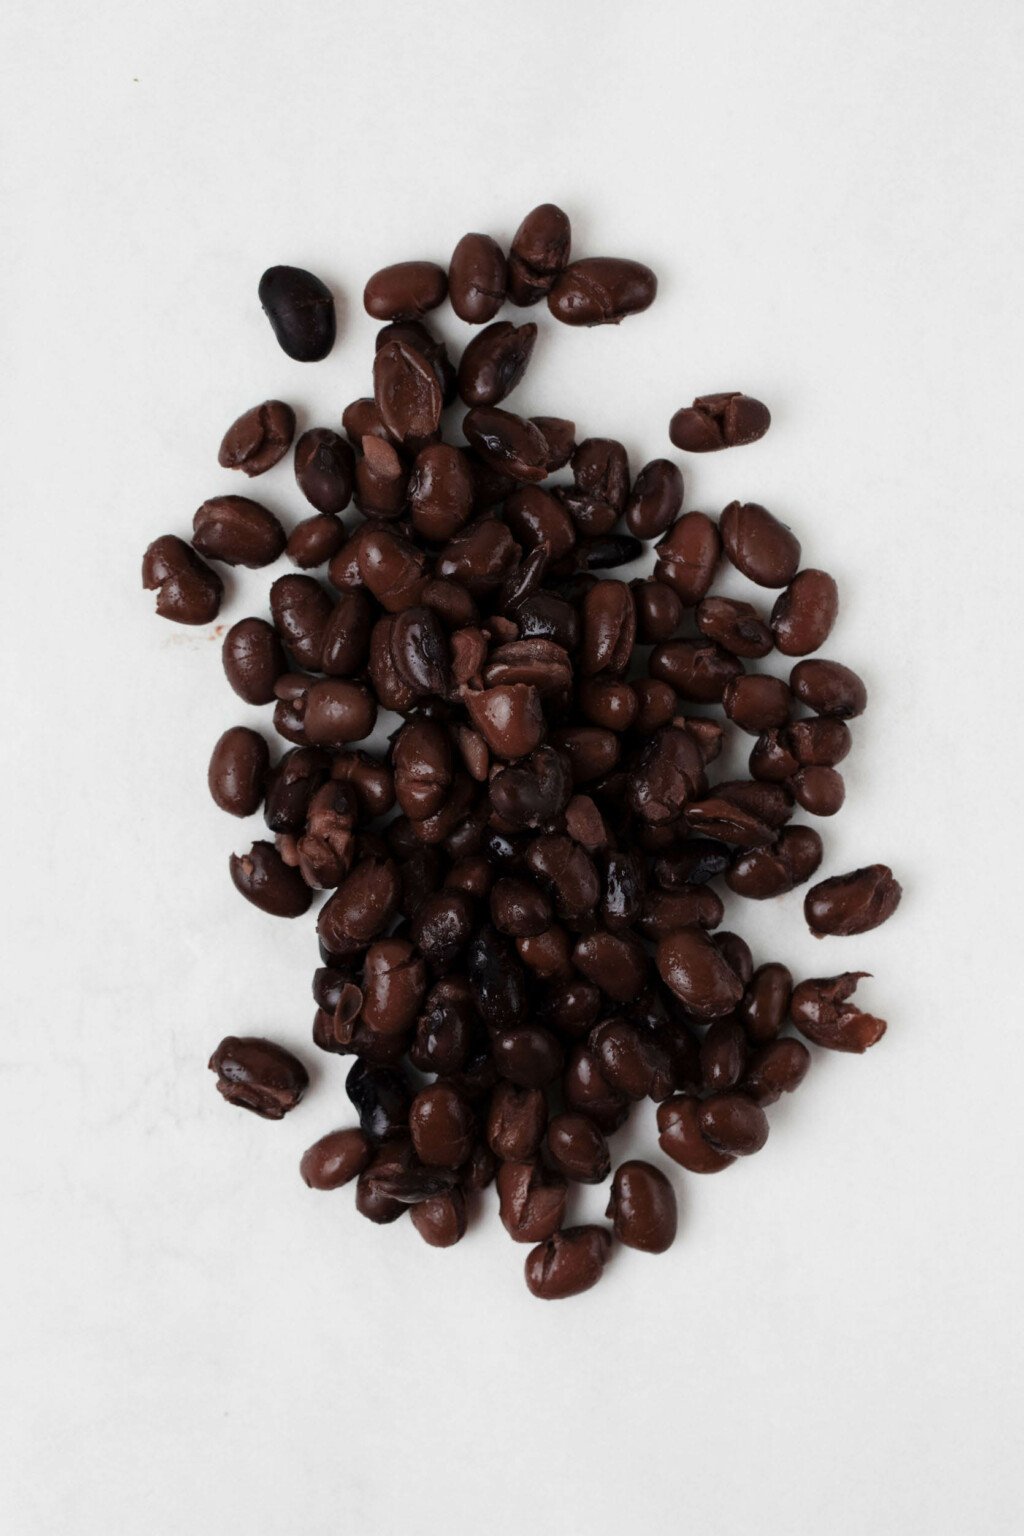 An overhead image of black beans, laid out on a white surface.